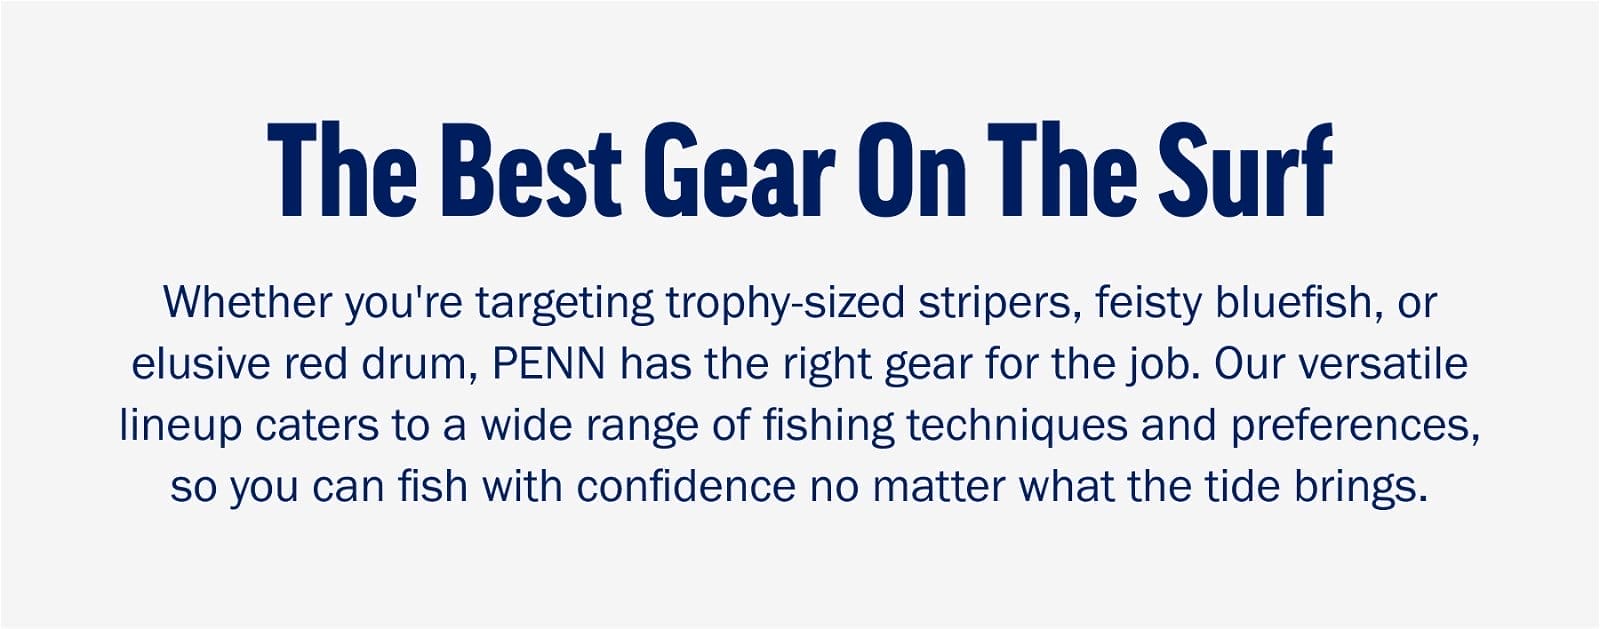 The Best Gear on the Surf - Whether you're targeting trophy-sized stripers, feisty bluefish, or elusive red drum, PENN has the right gear for the job. Our versatile lineup caters to a wide range of fishing techniques and preferences, so you can fish with confidence no matter what the tide brings.